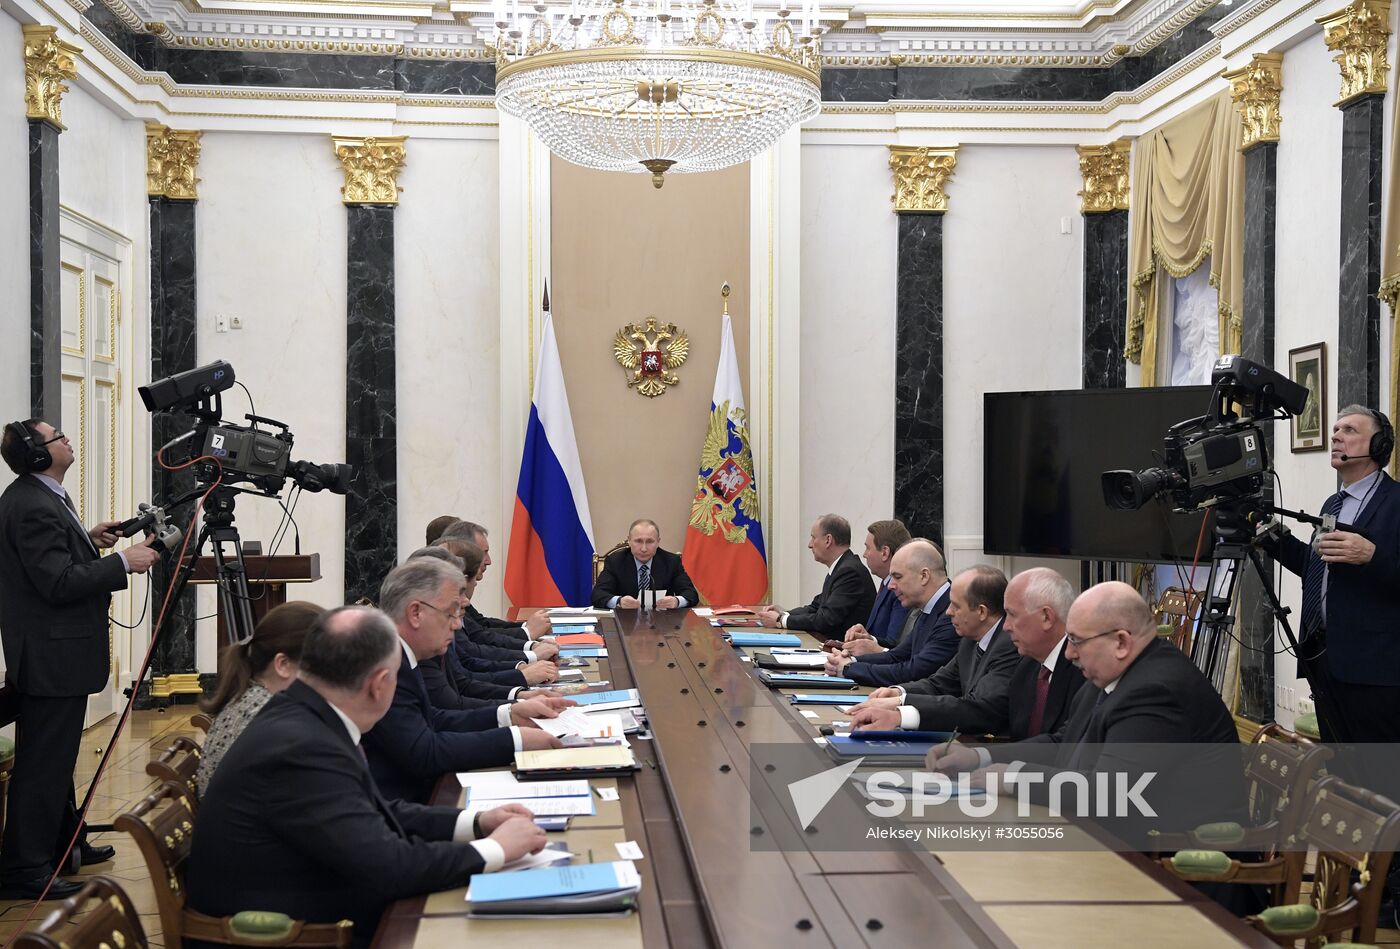 President Vladimir Putin holds meeting of Commission for Military and Technical Cooperation